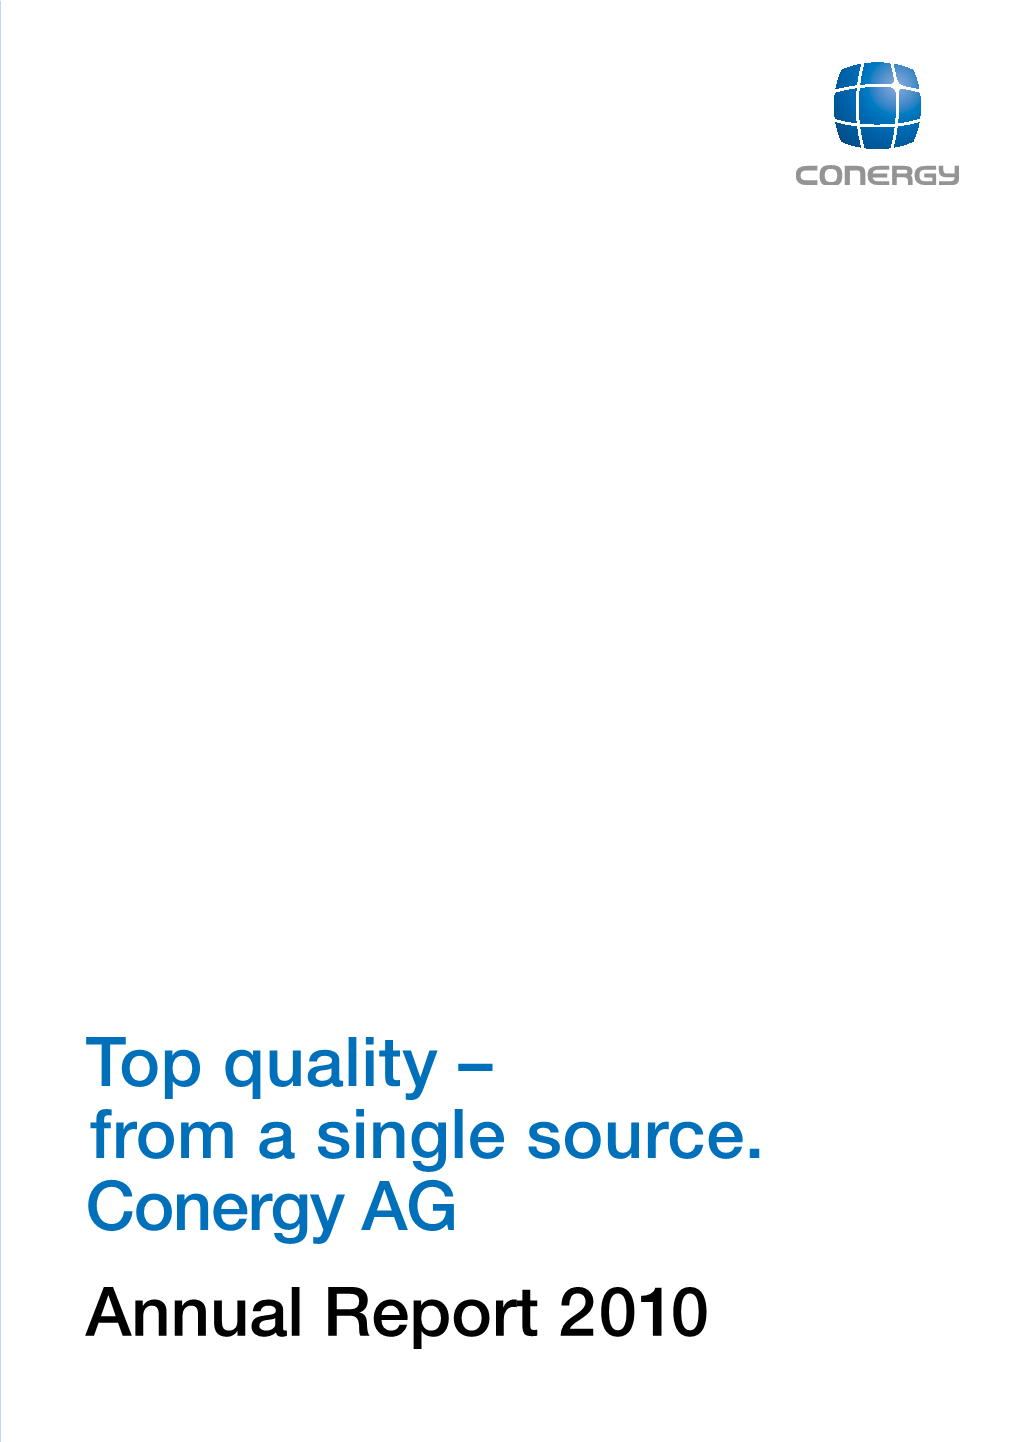 From a Single Source. Conergy AG Annual Report 2010